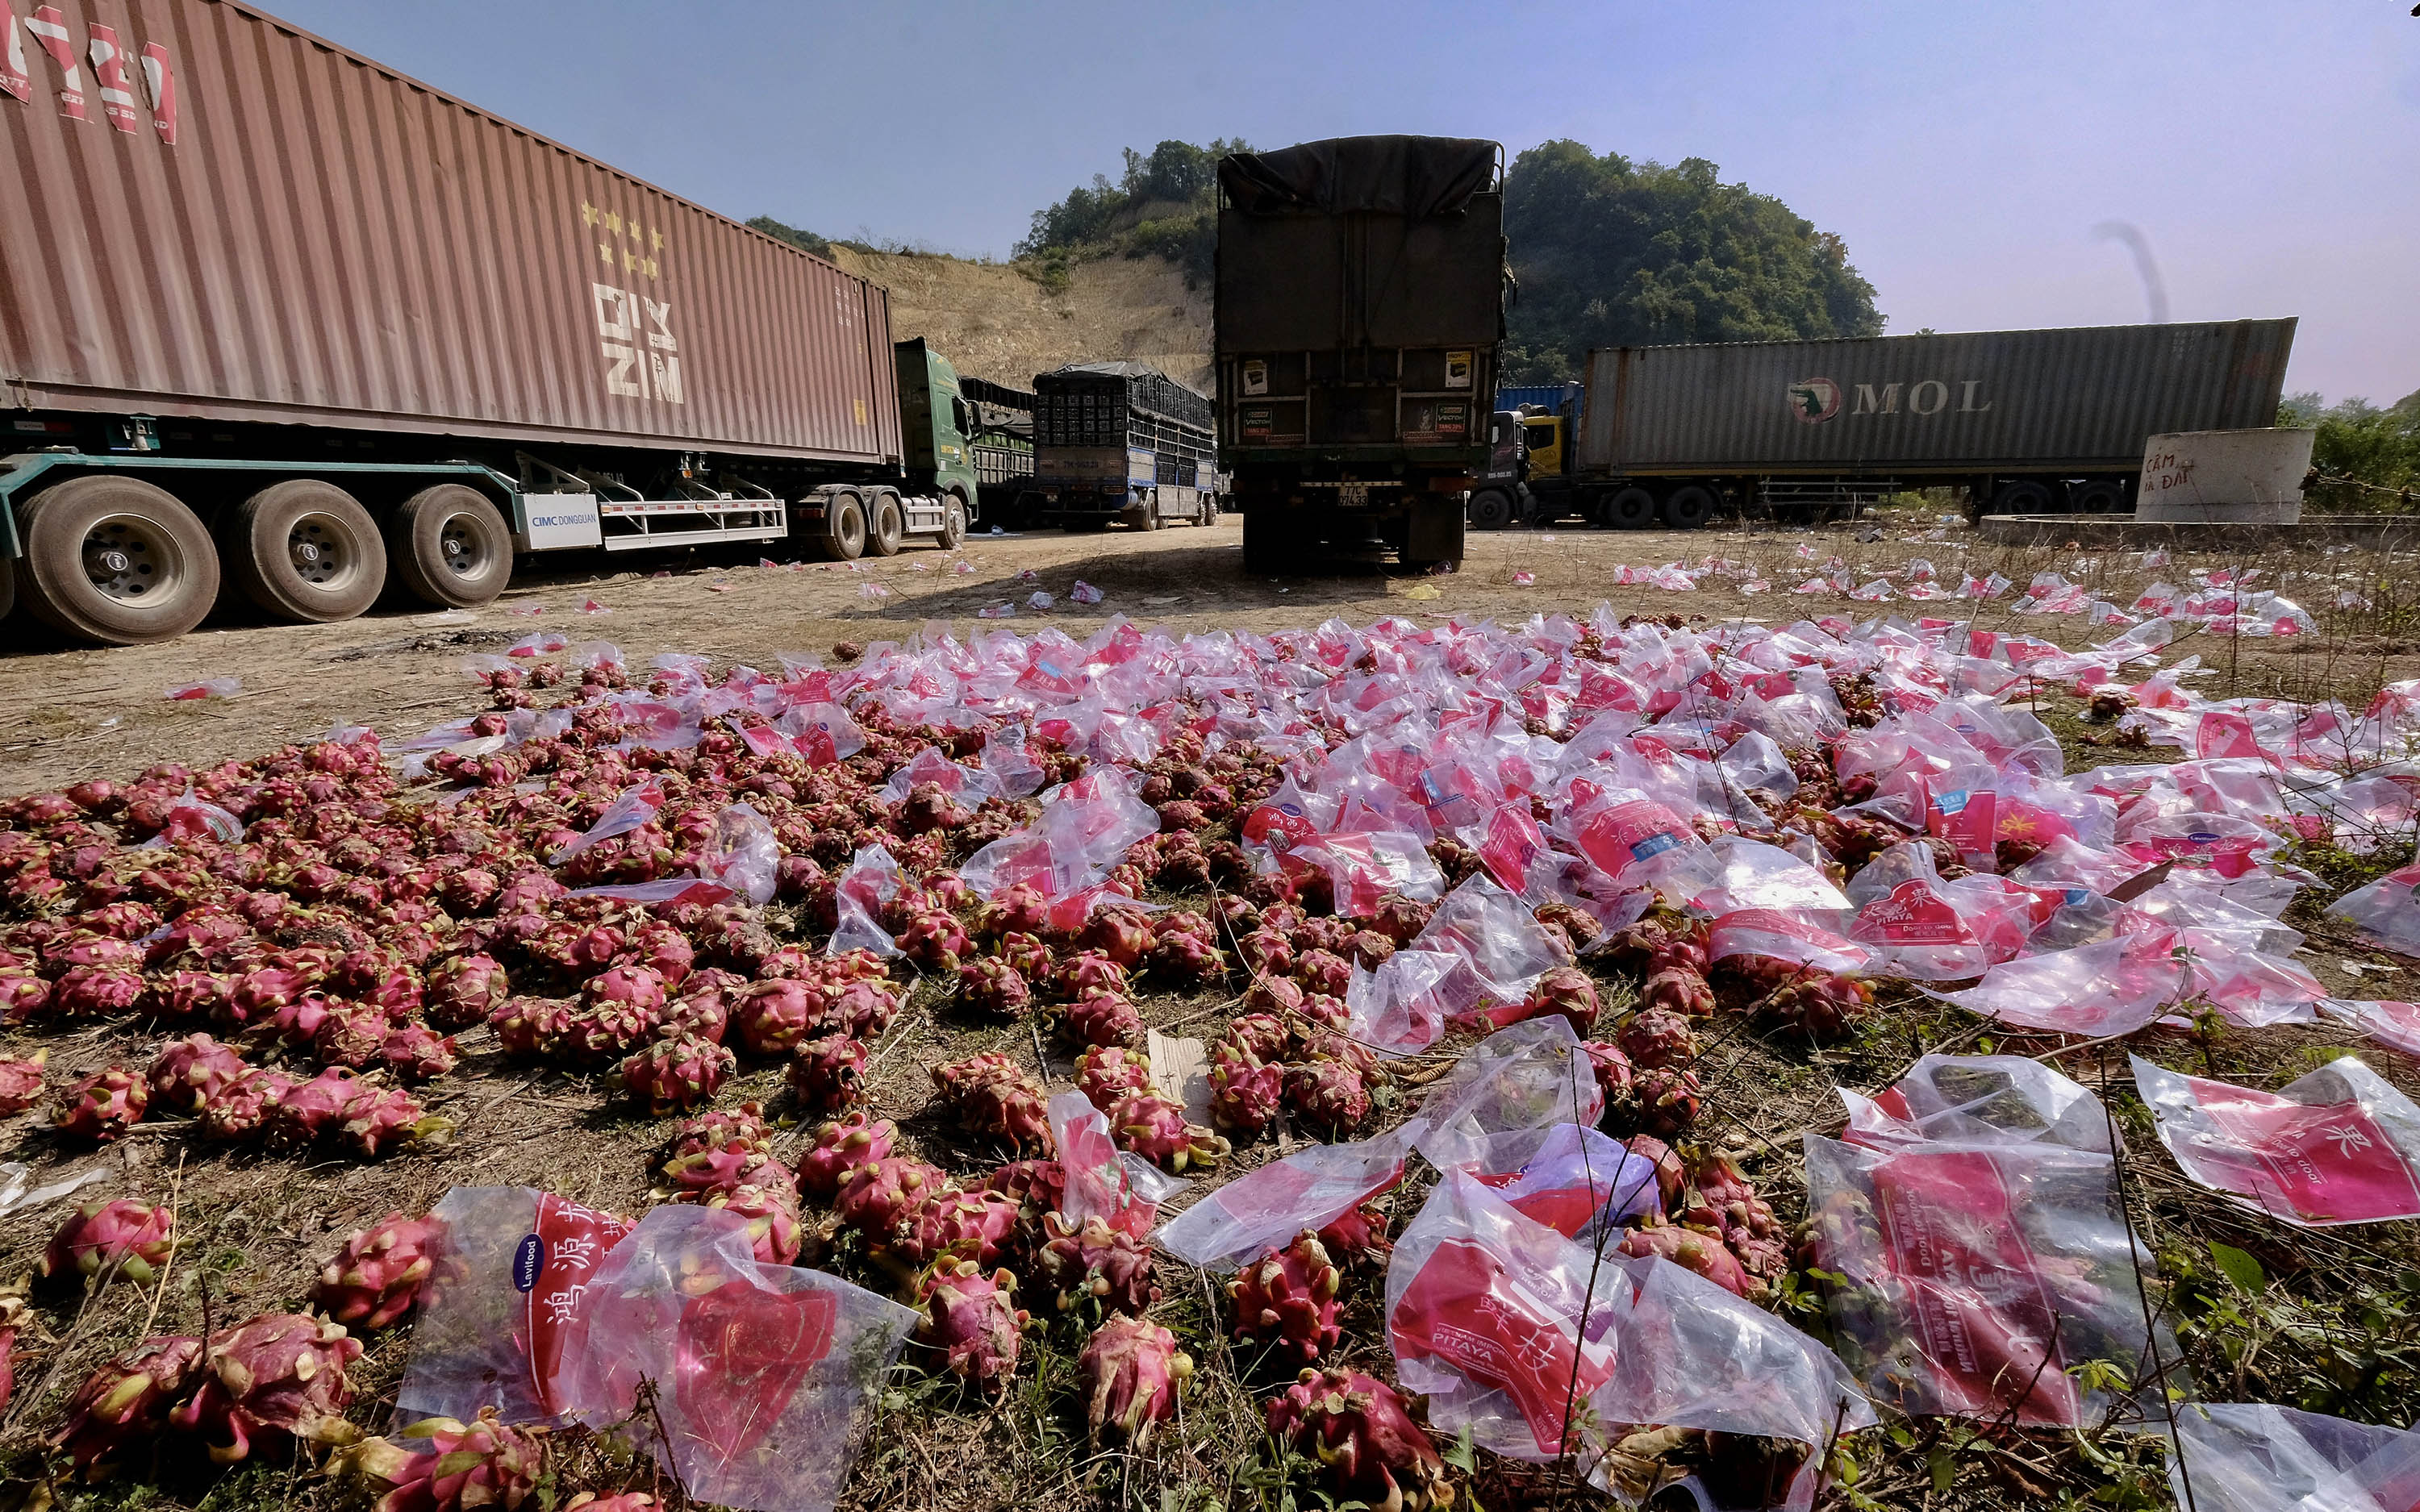 Truck drivers spread dragon fruits on the ground to prevent them from perishing at Tan Thanh Border Gate in Lang Son Province, December 18, 2021. Photo: Nam Tran / Tuoi Tre